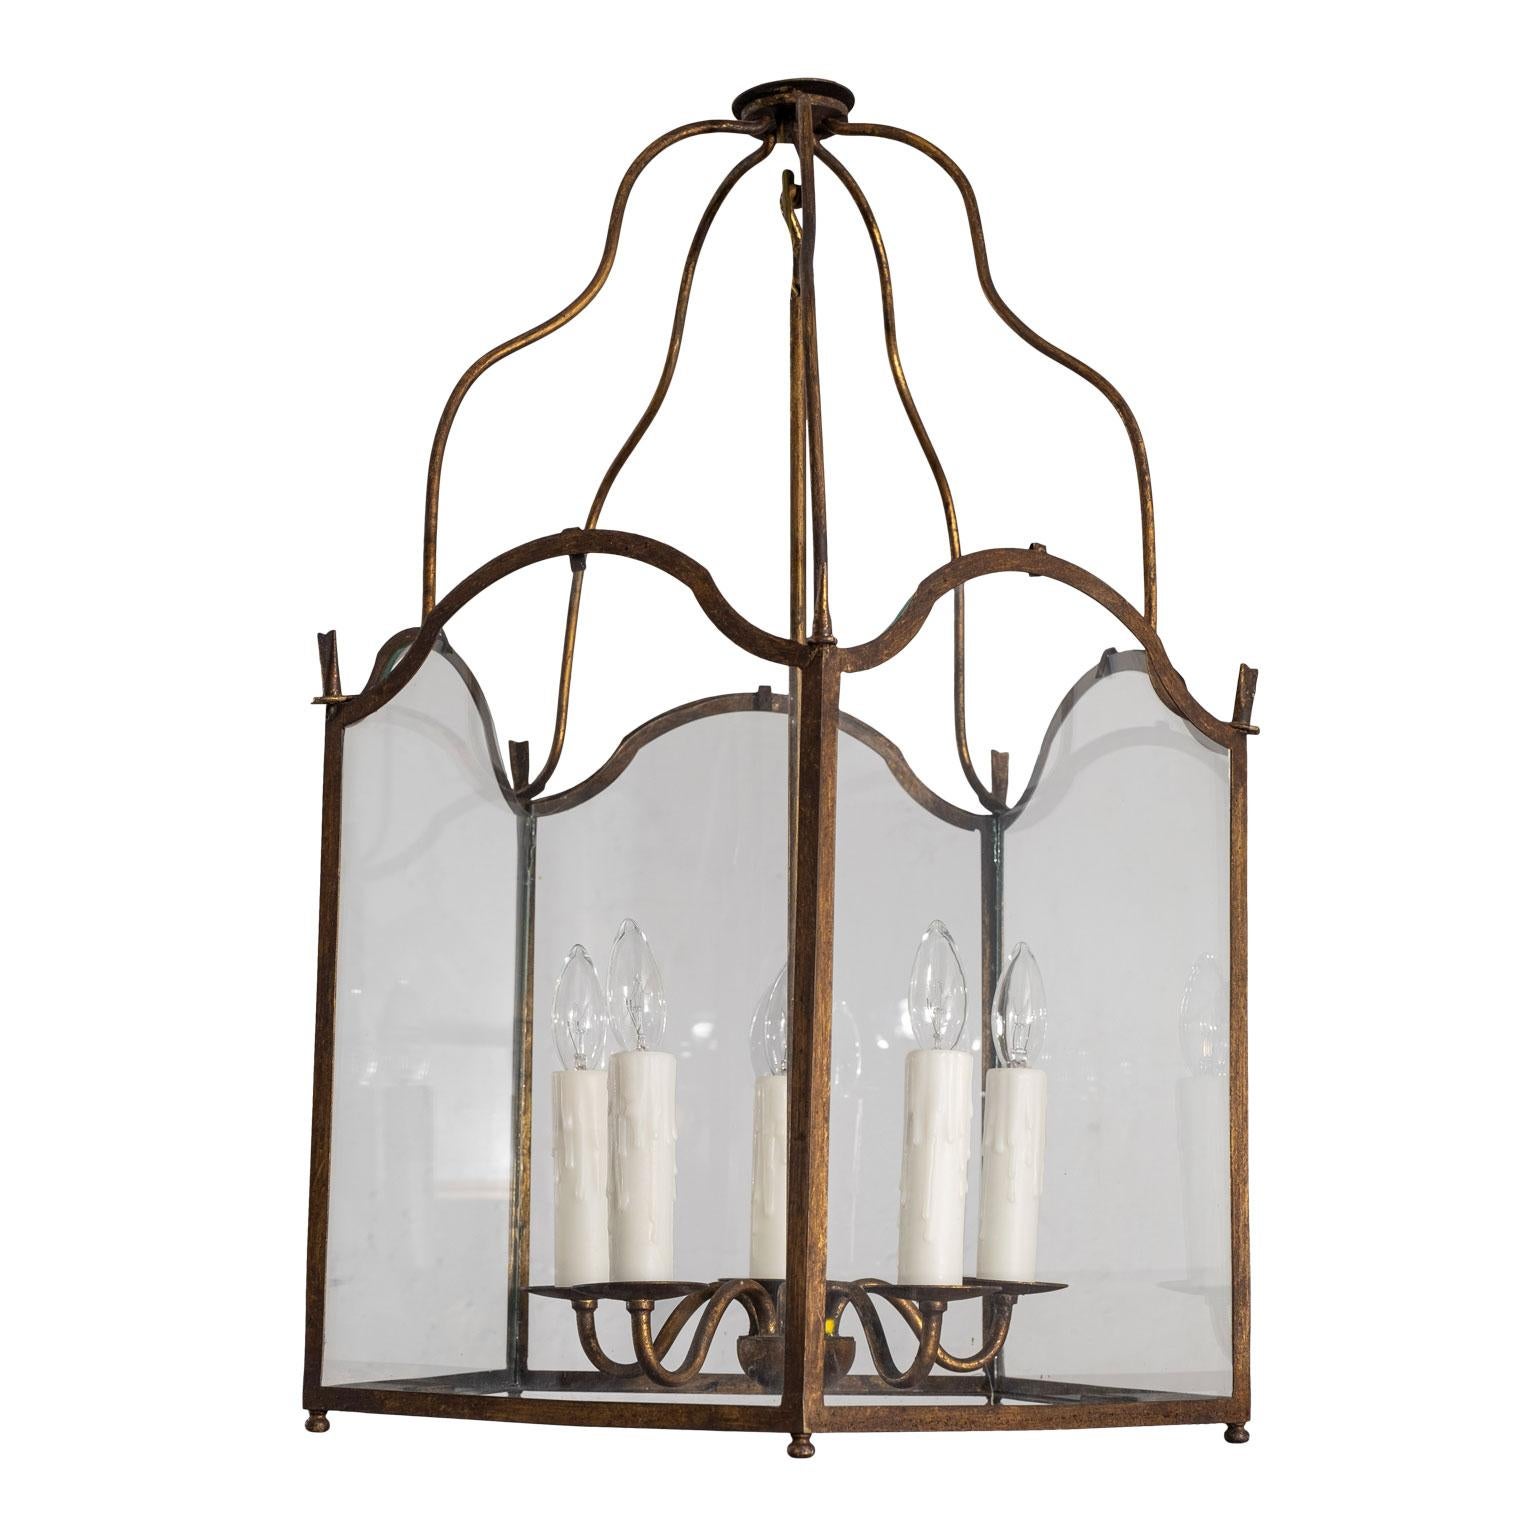 Pair of gilt-tole five-sided Italian lanterns with glazed panels (glass), circa 1910-1930. Newly wired for use within the USA using UL listed parts. Five candelabra-size sockets in each lantern. Include chain and canopies (listed height doesn't